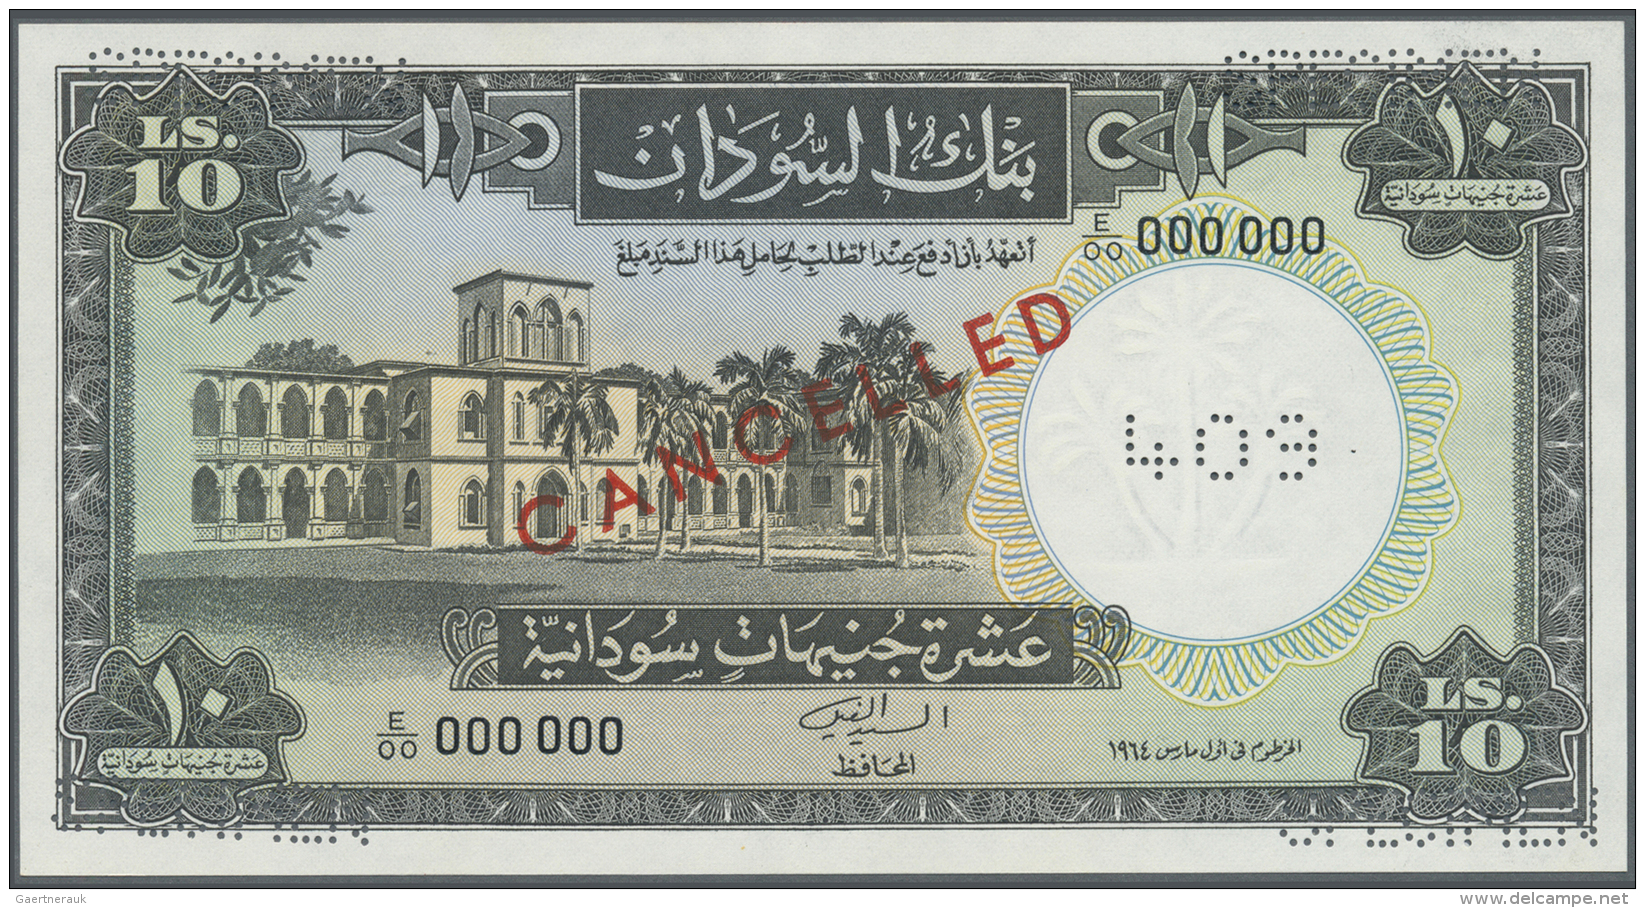 Sudan: 10 Pounds 1964 Specimen P. 10as, Perforated, Overprinted Cancelled, Zero Serial Numbers, In Condition: UNC. - Soudan